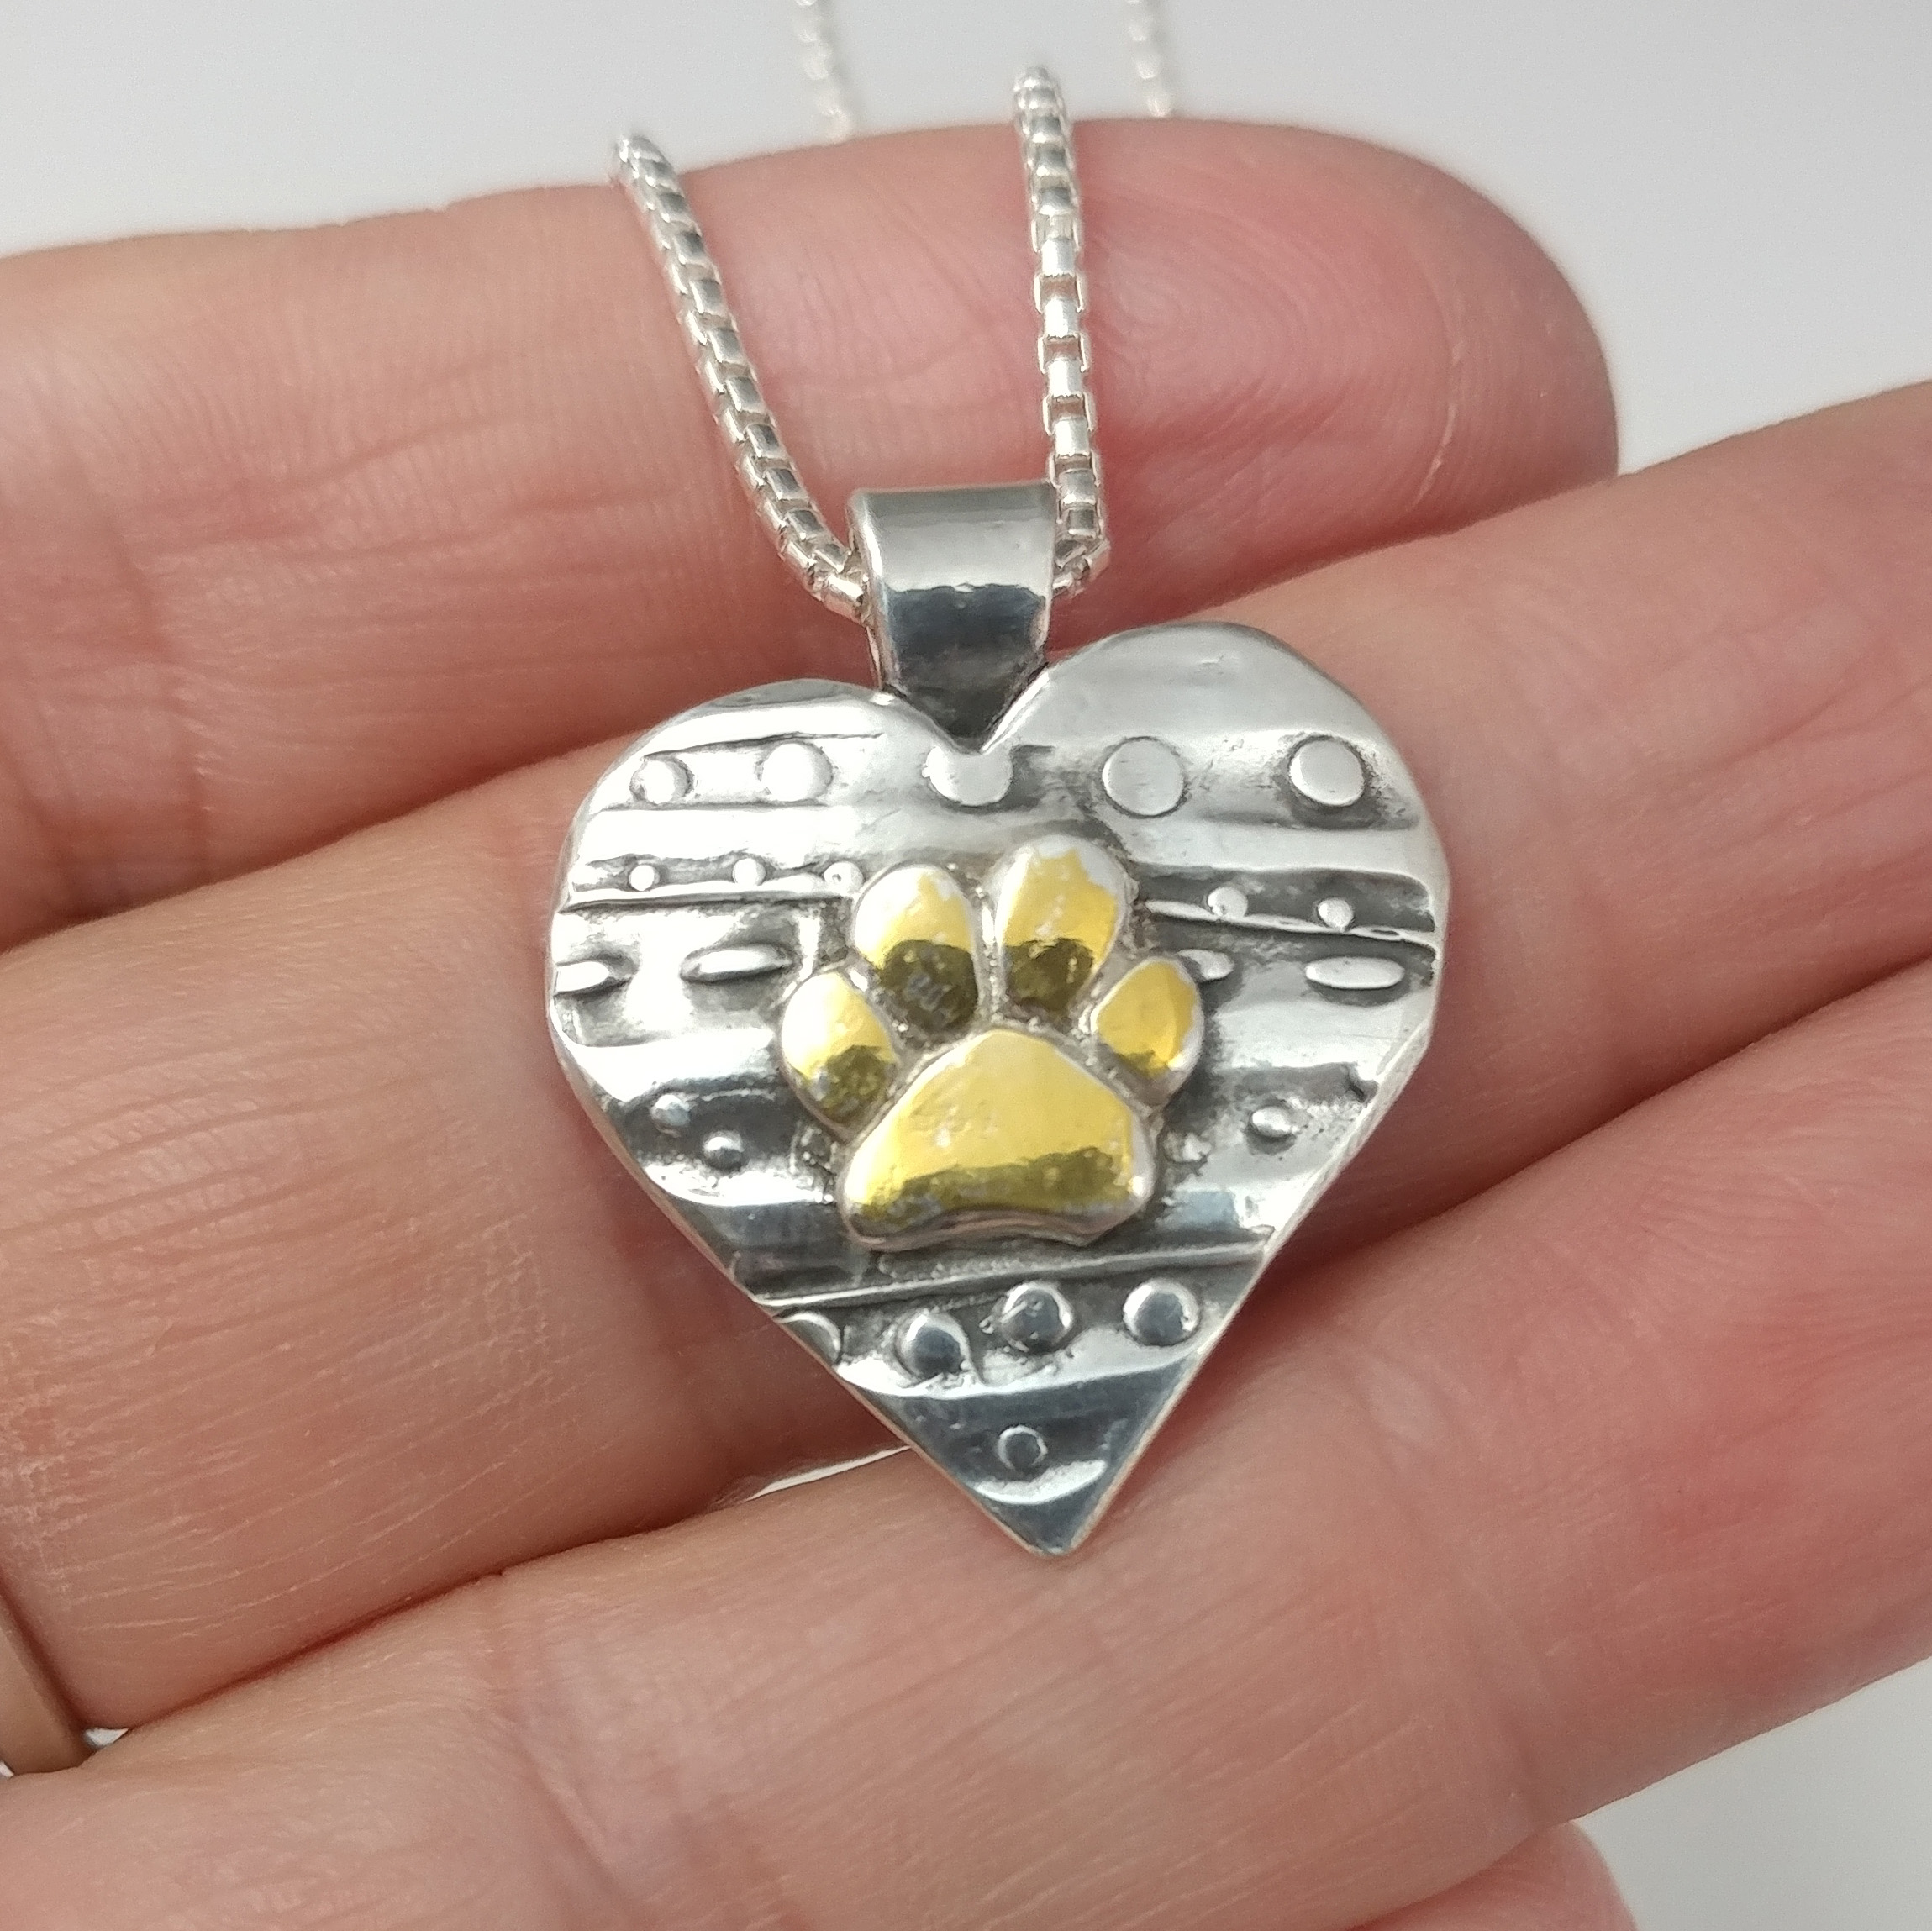 Hue Sterling Silver Crystal Dog Paw Print Pendant Necklace